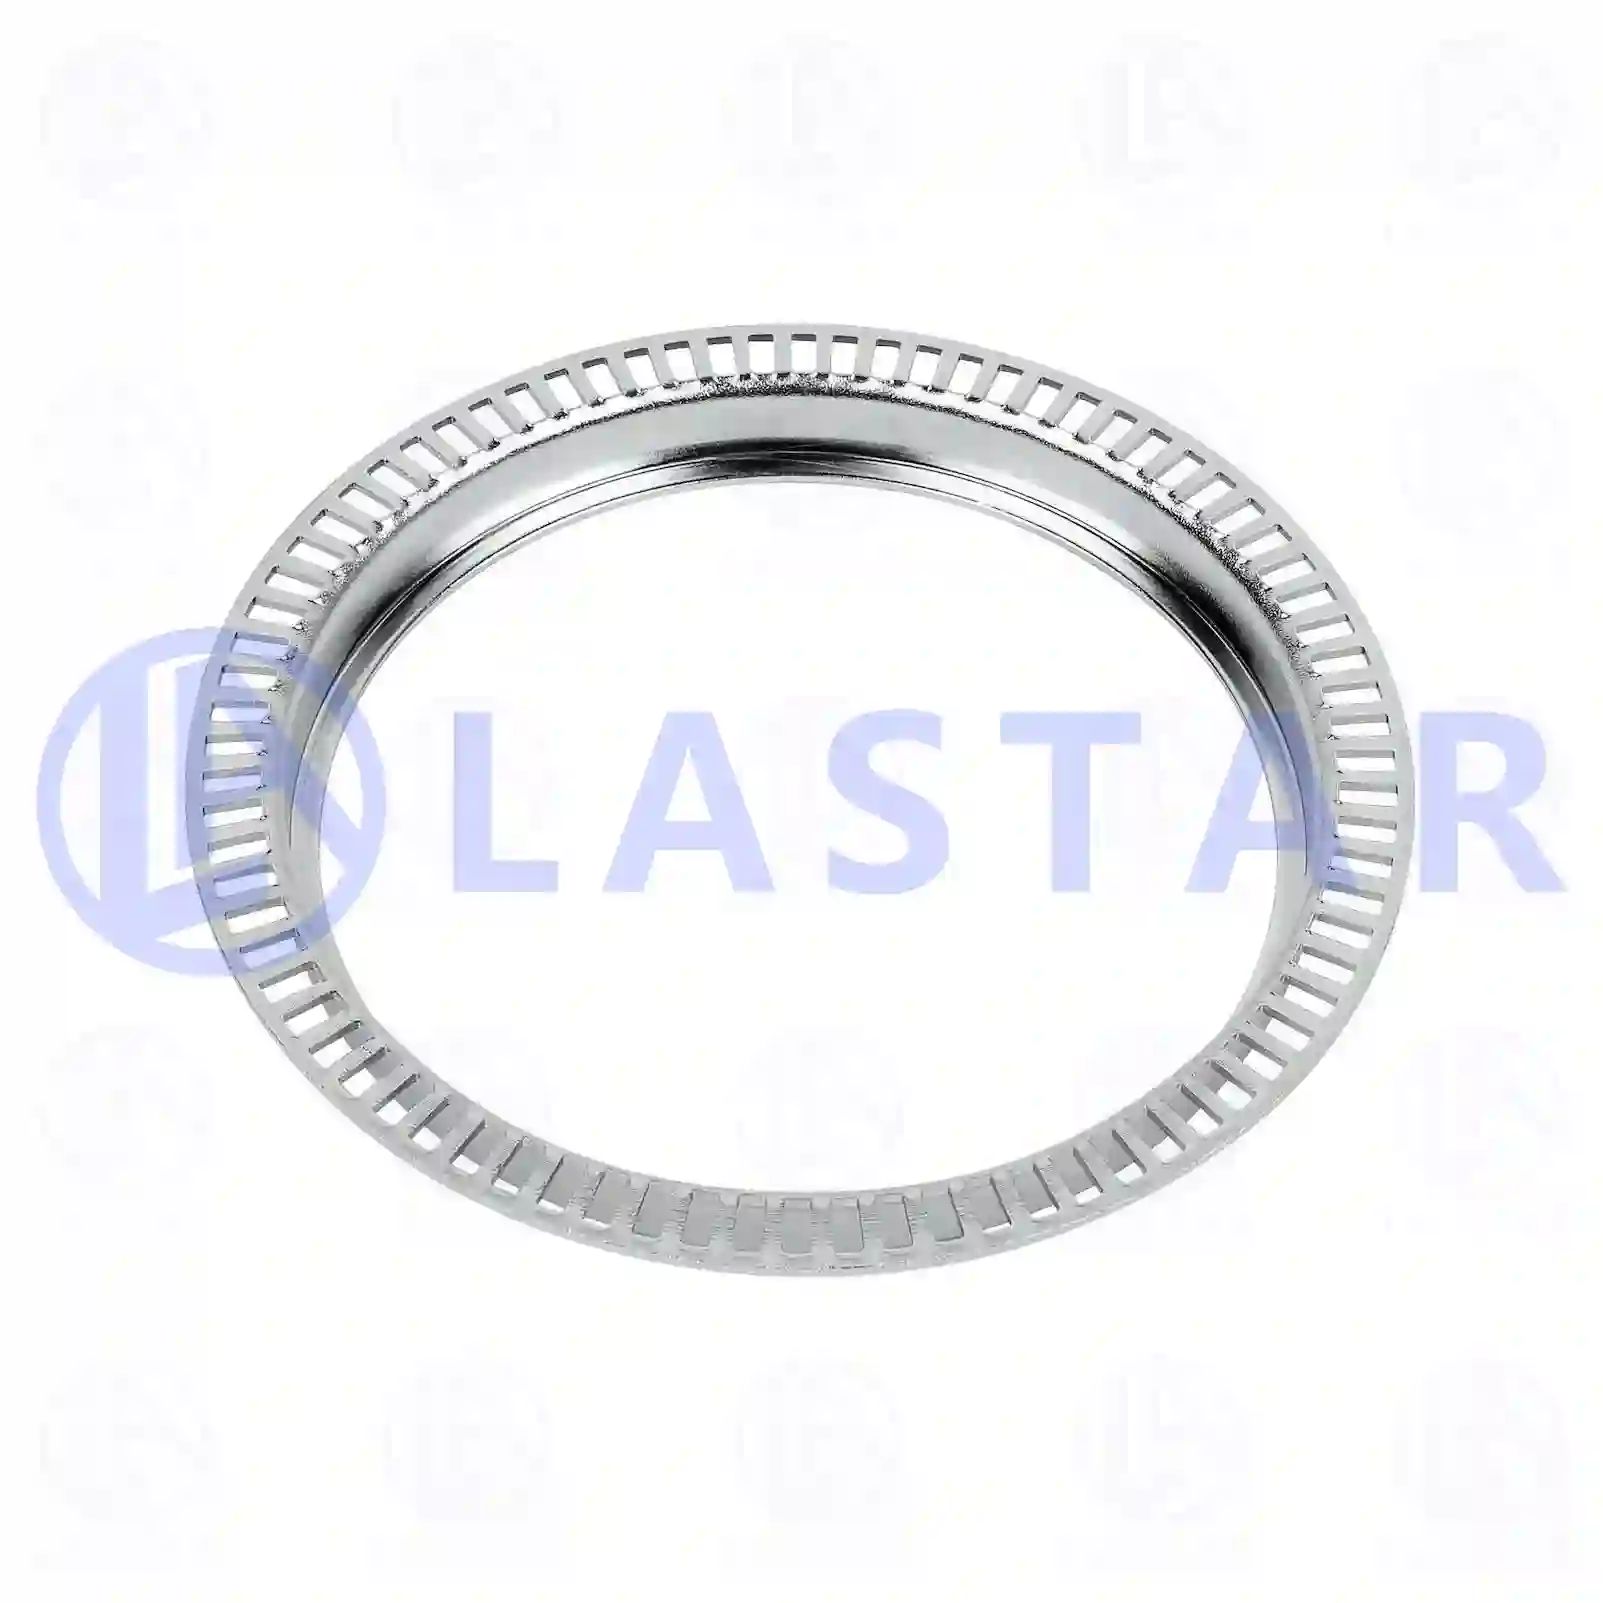 ABS ring, 77726348, 9763560015, ZG50013-0008, , ||  77726348 Lastar Spare Part | Truck Spare Parts, Auotomotive Spare Parts ABS ring, 77726348, 9763560015, ZG50013-0008, , ||  77726348 Lastar Spare Part | Truck Spare Parts, Auotomotive Spare Parts